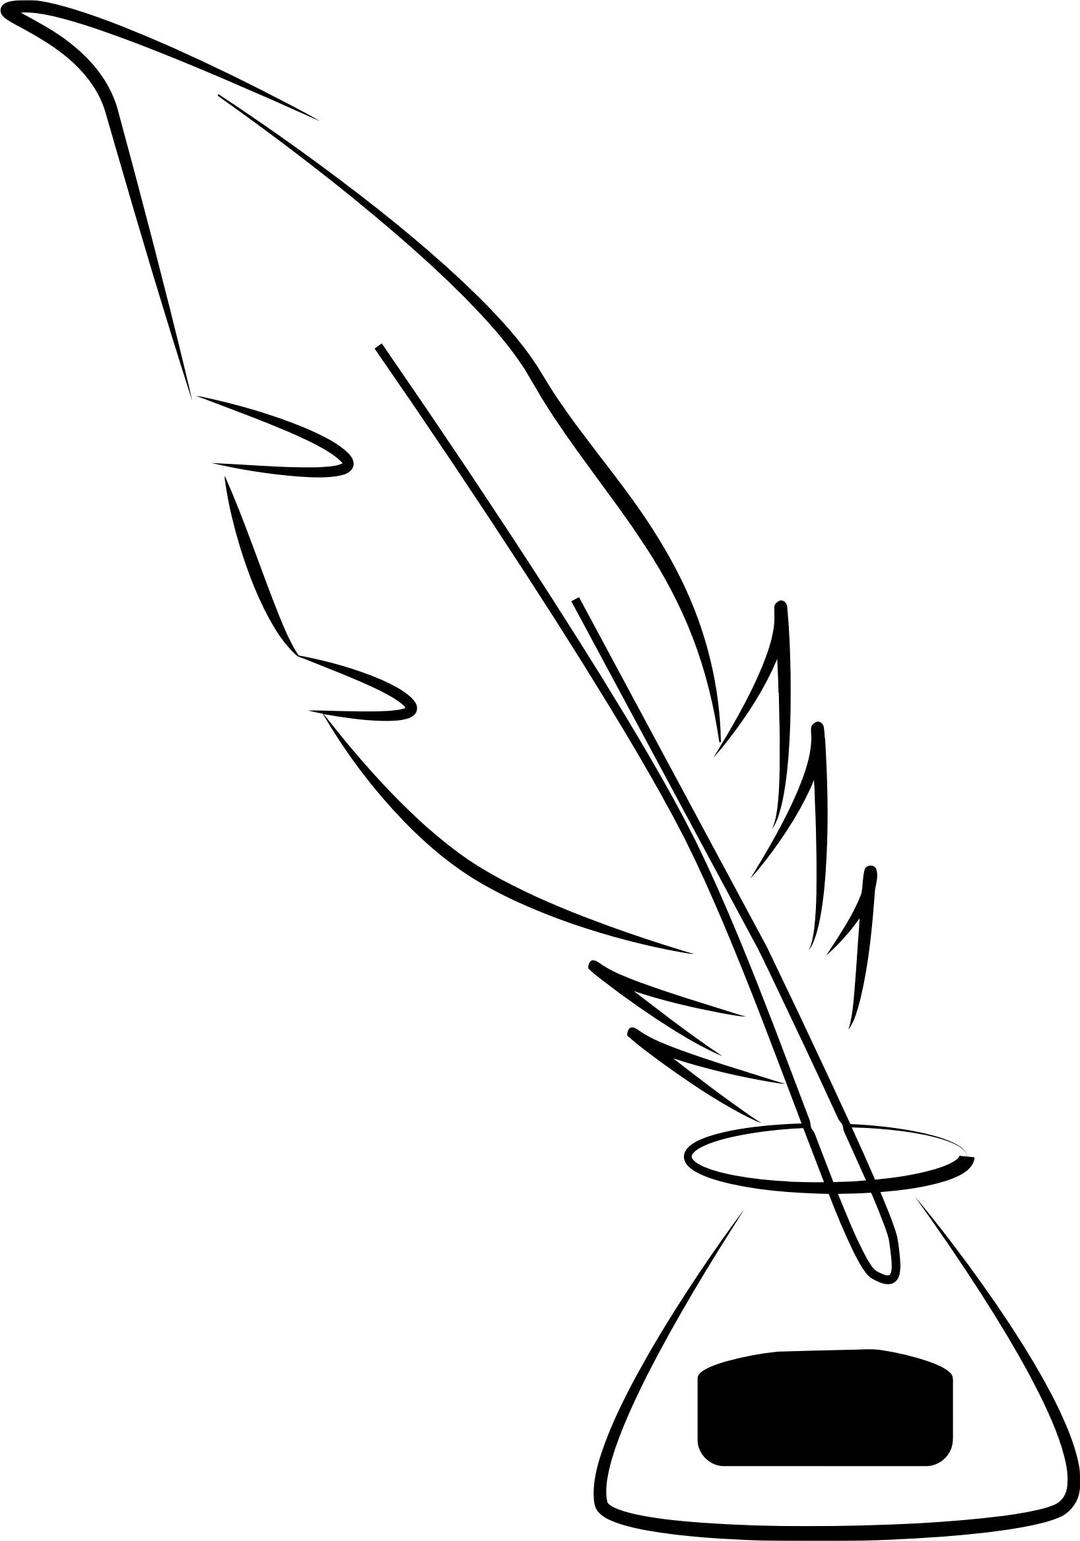 Quill And Ink Line Art png transparent